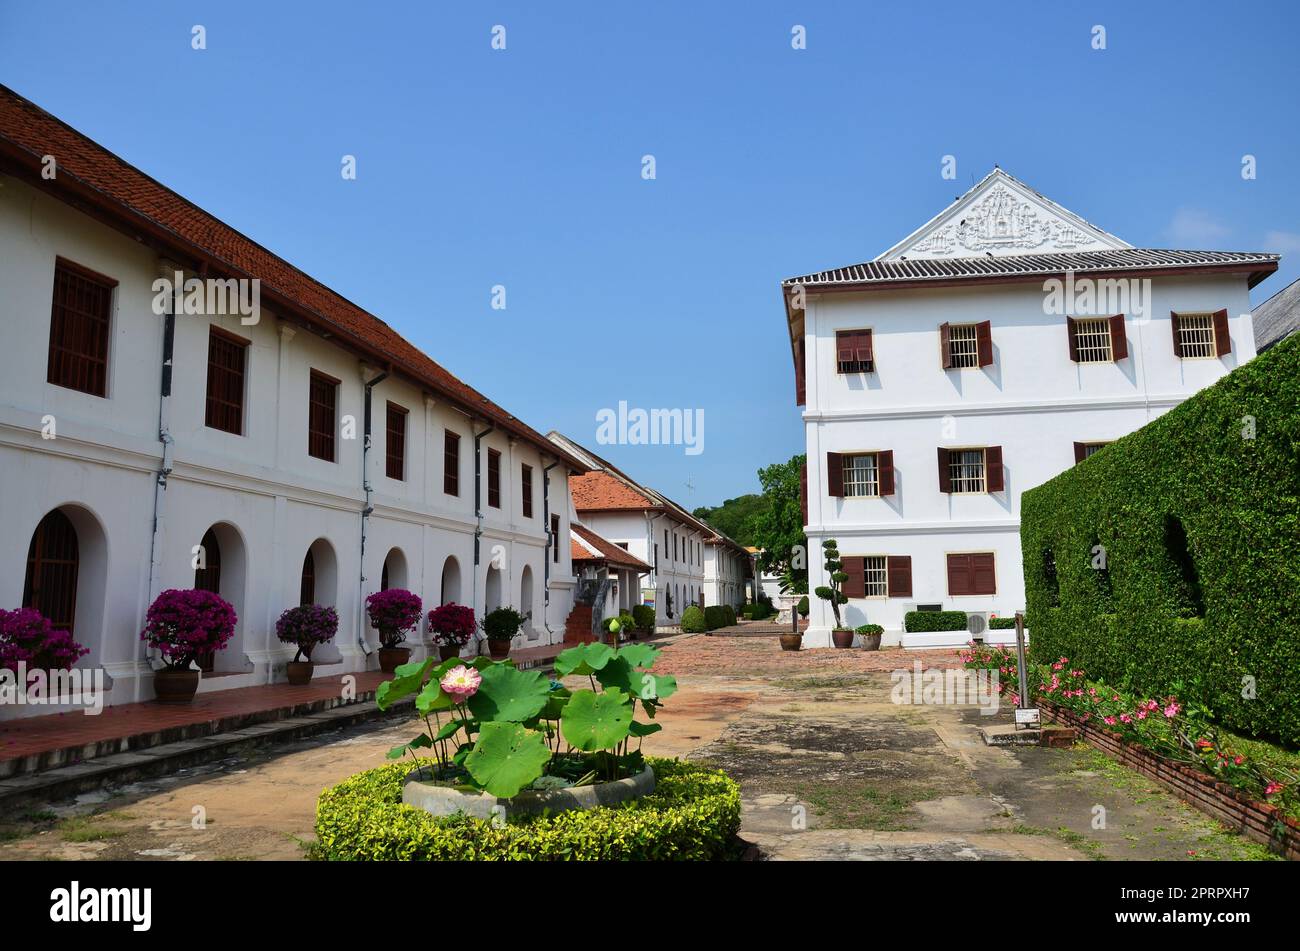 Ancient ruins buildings and antique architecture Phiman Mongkut Pavilion of King Narai Ratchaniwet Palace for thai people foreign travelers visit expl Stock Photo